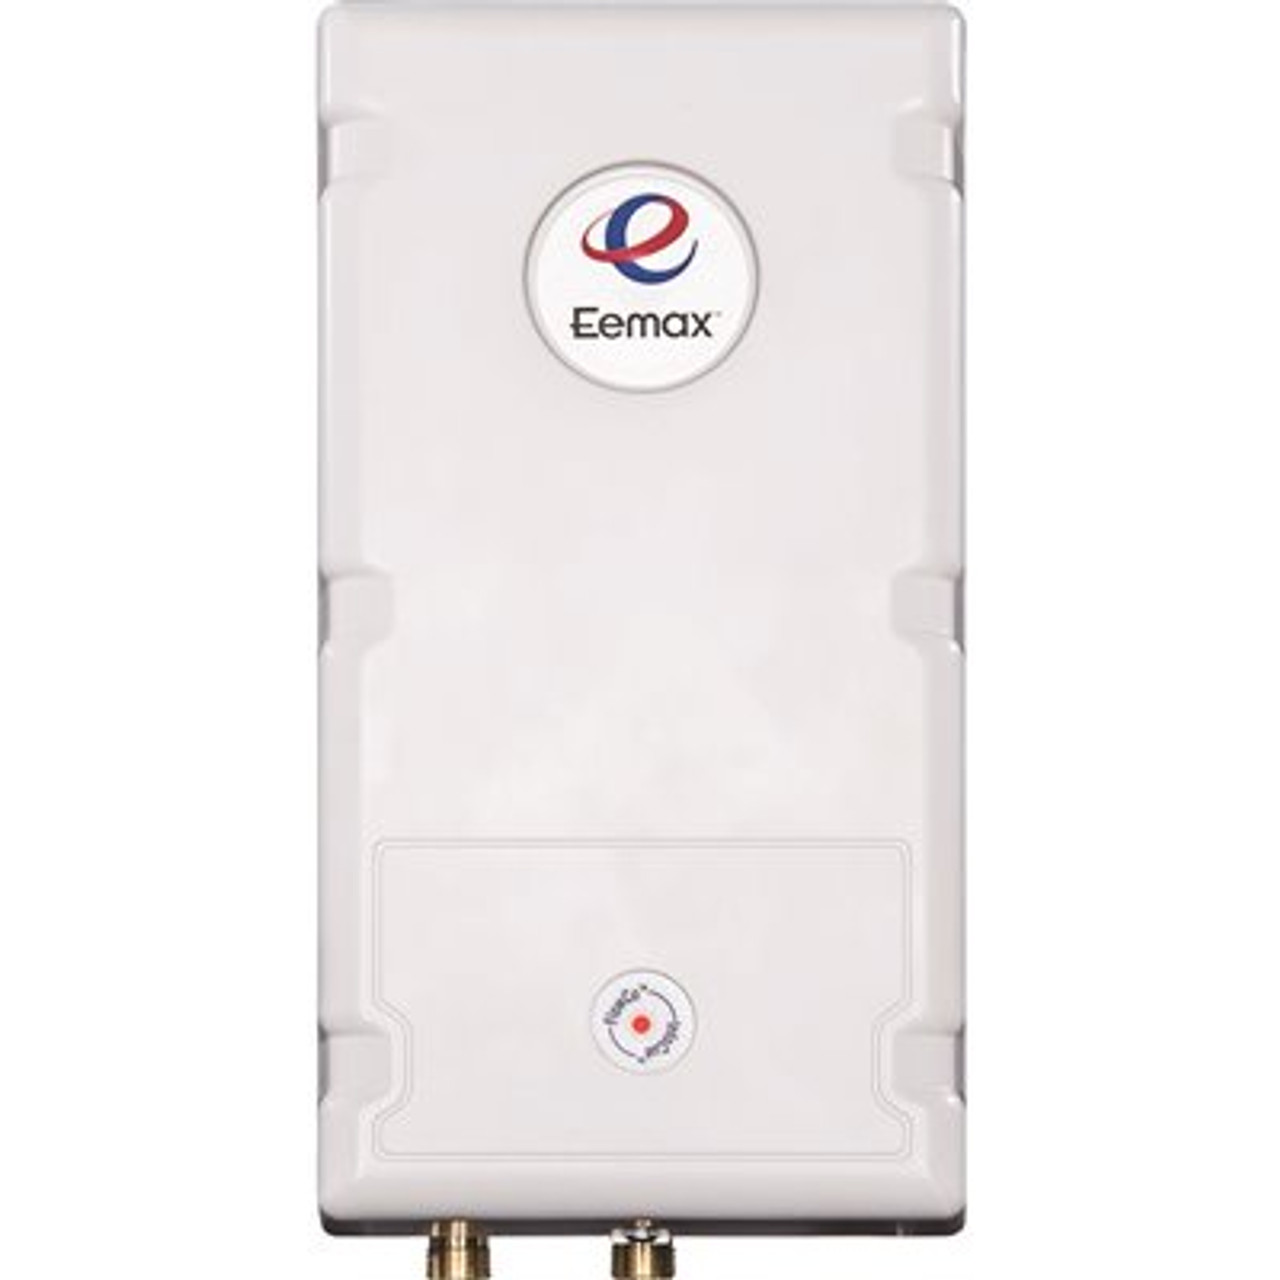 Eemax FlowCo 10 kW, 277 Volt Commercial Electric Tankless Water Heater